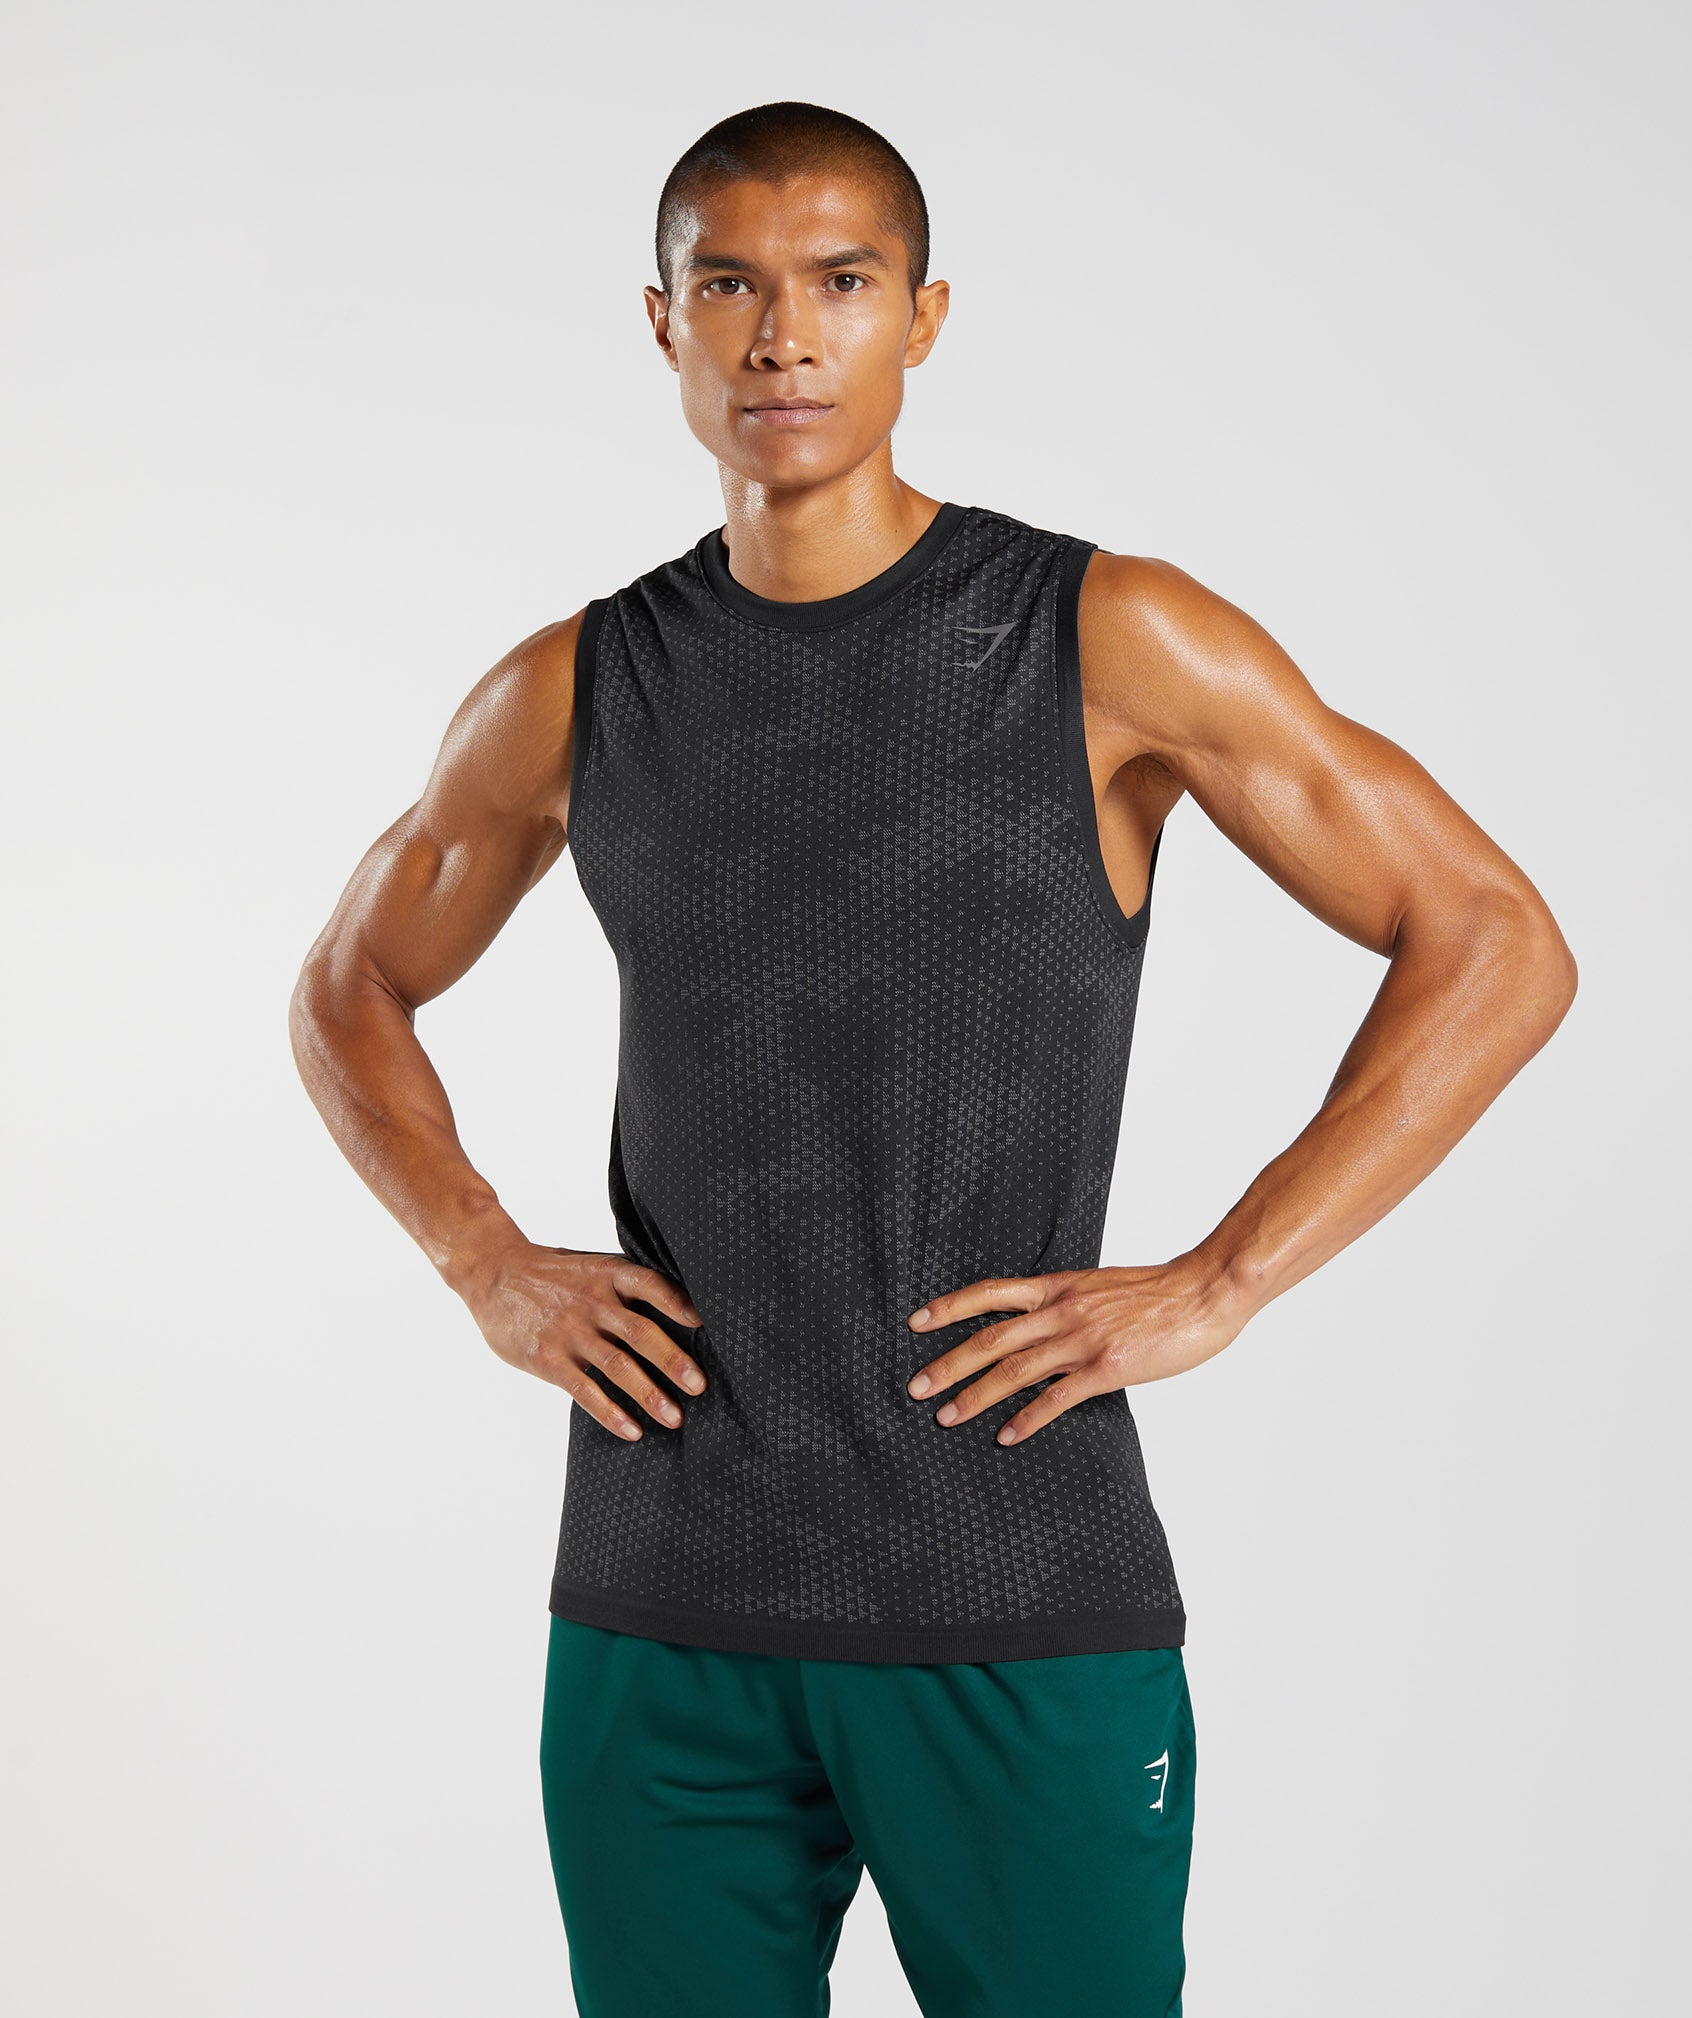 Men's Workout Tanks – Gym Tank tops from Gymshark